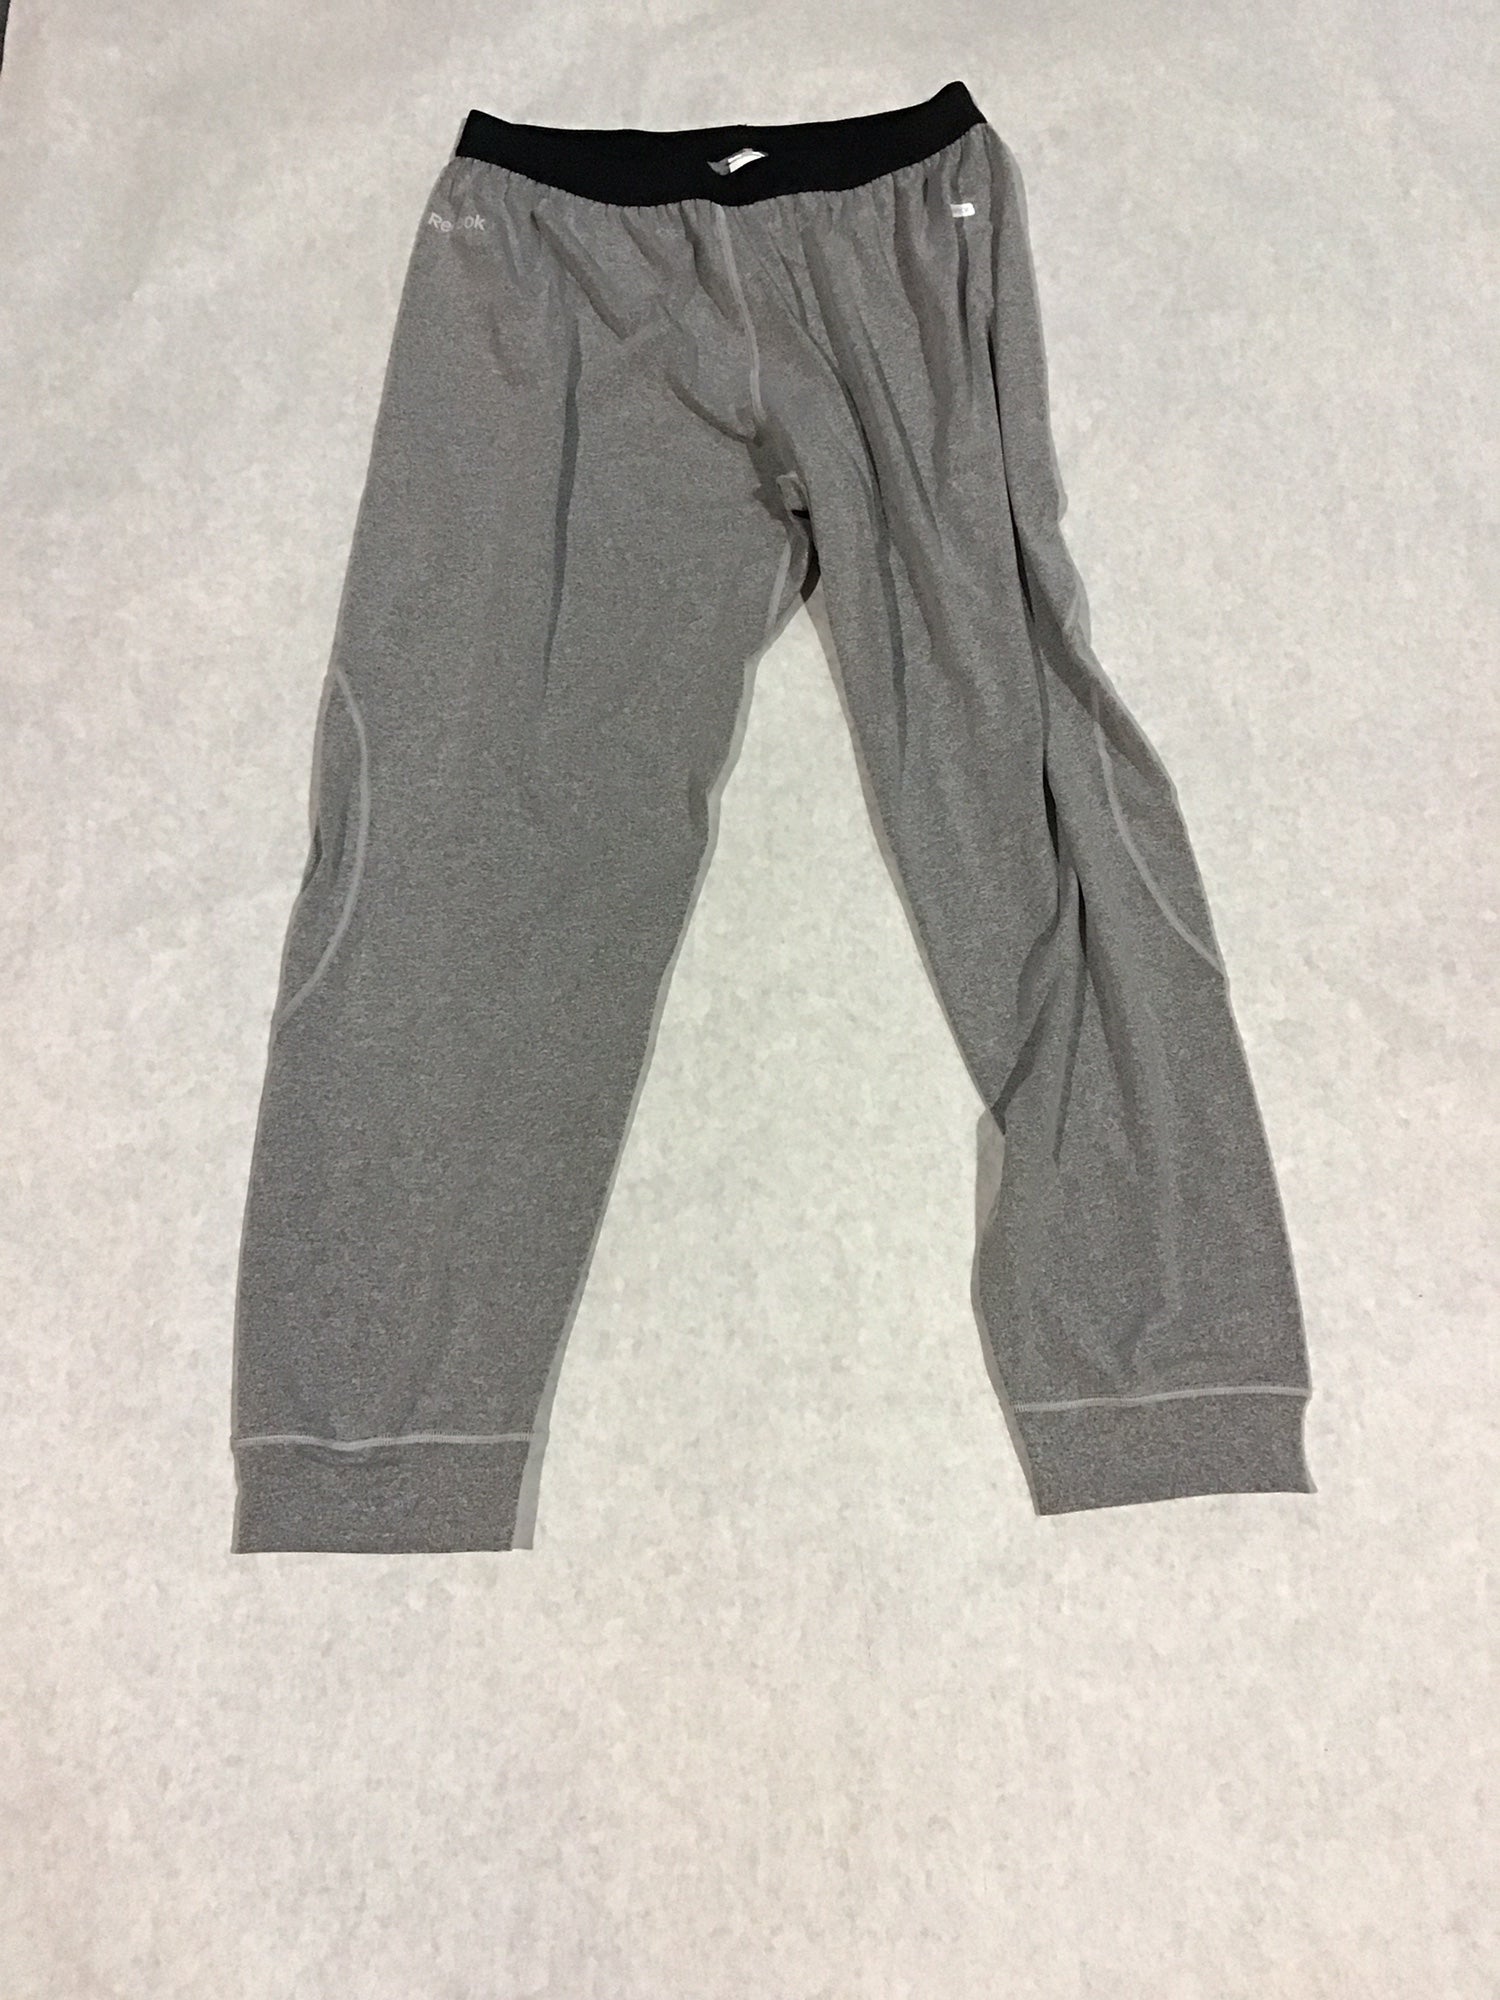 New in Box! Daisy Details about   Hot Chillys Kids Girls MTF Base Layer Bottoms Pants S 